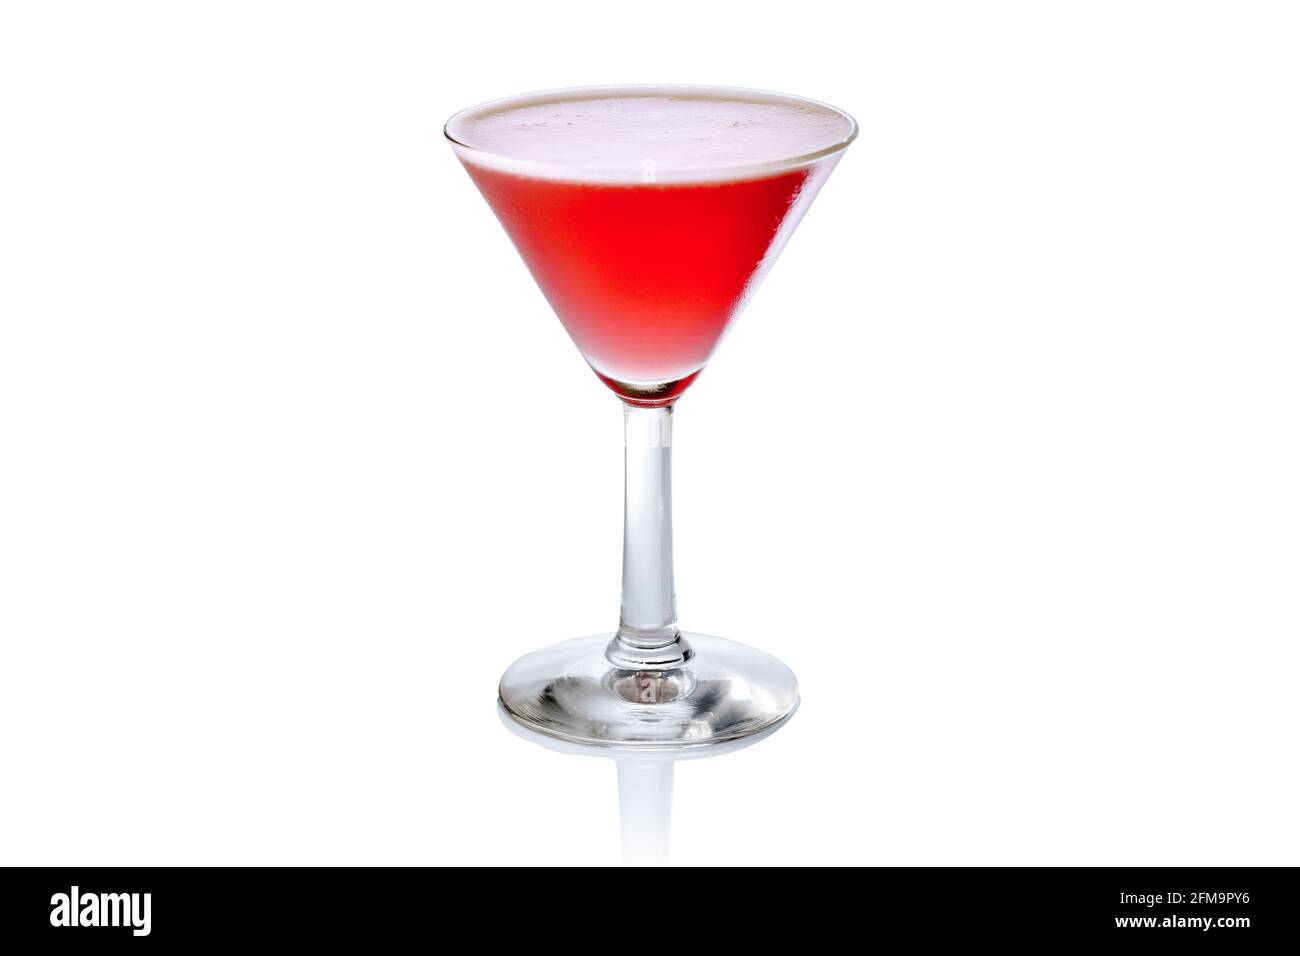 Clover club cocktail in martini glass isolated on white background Stock Photo